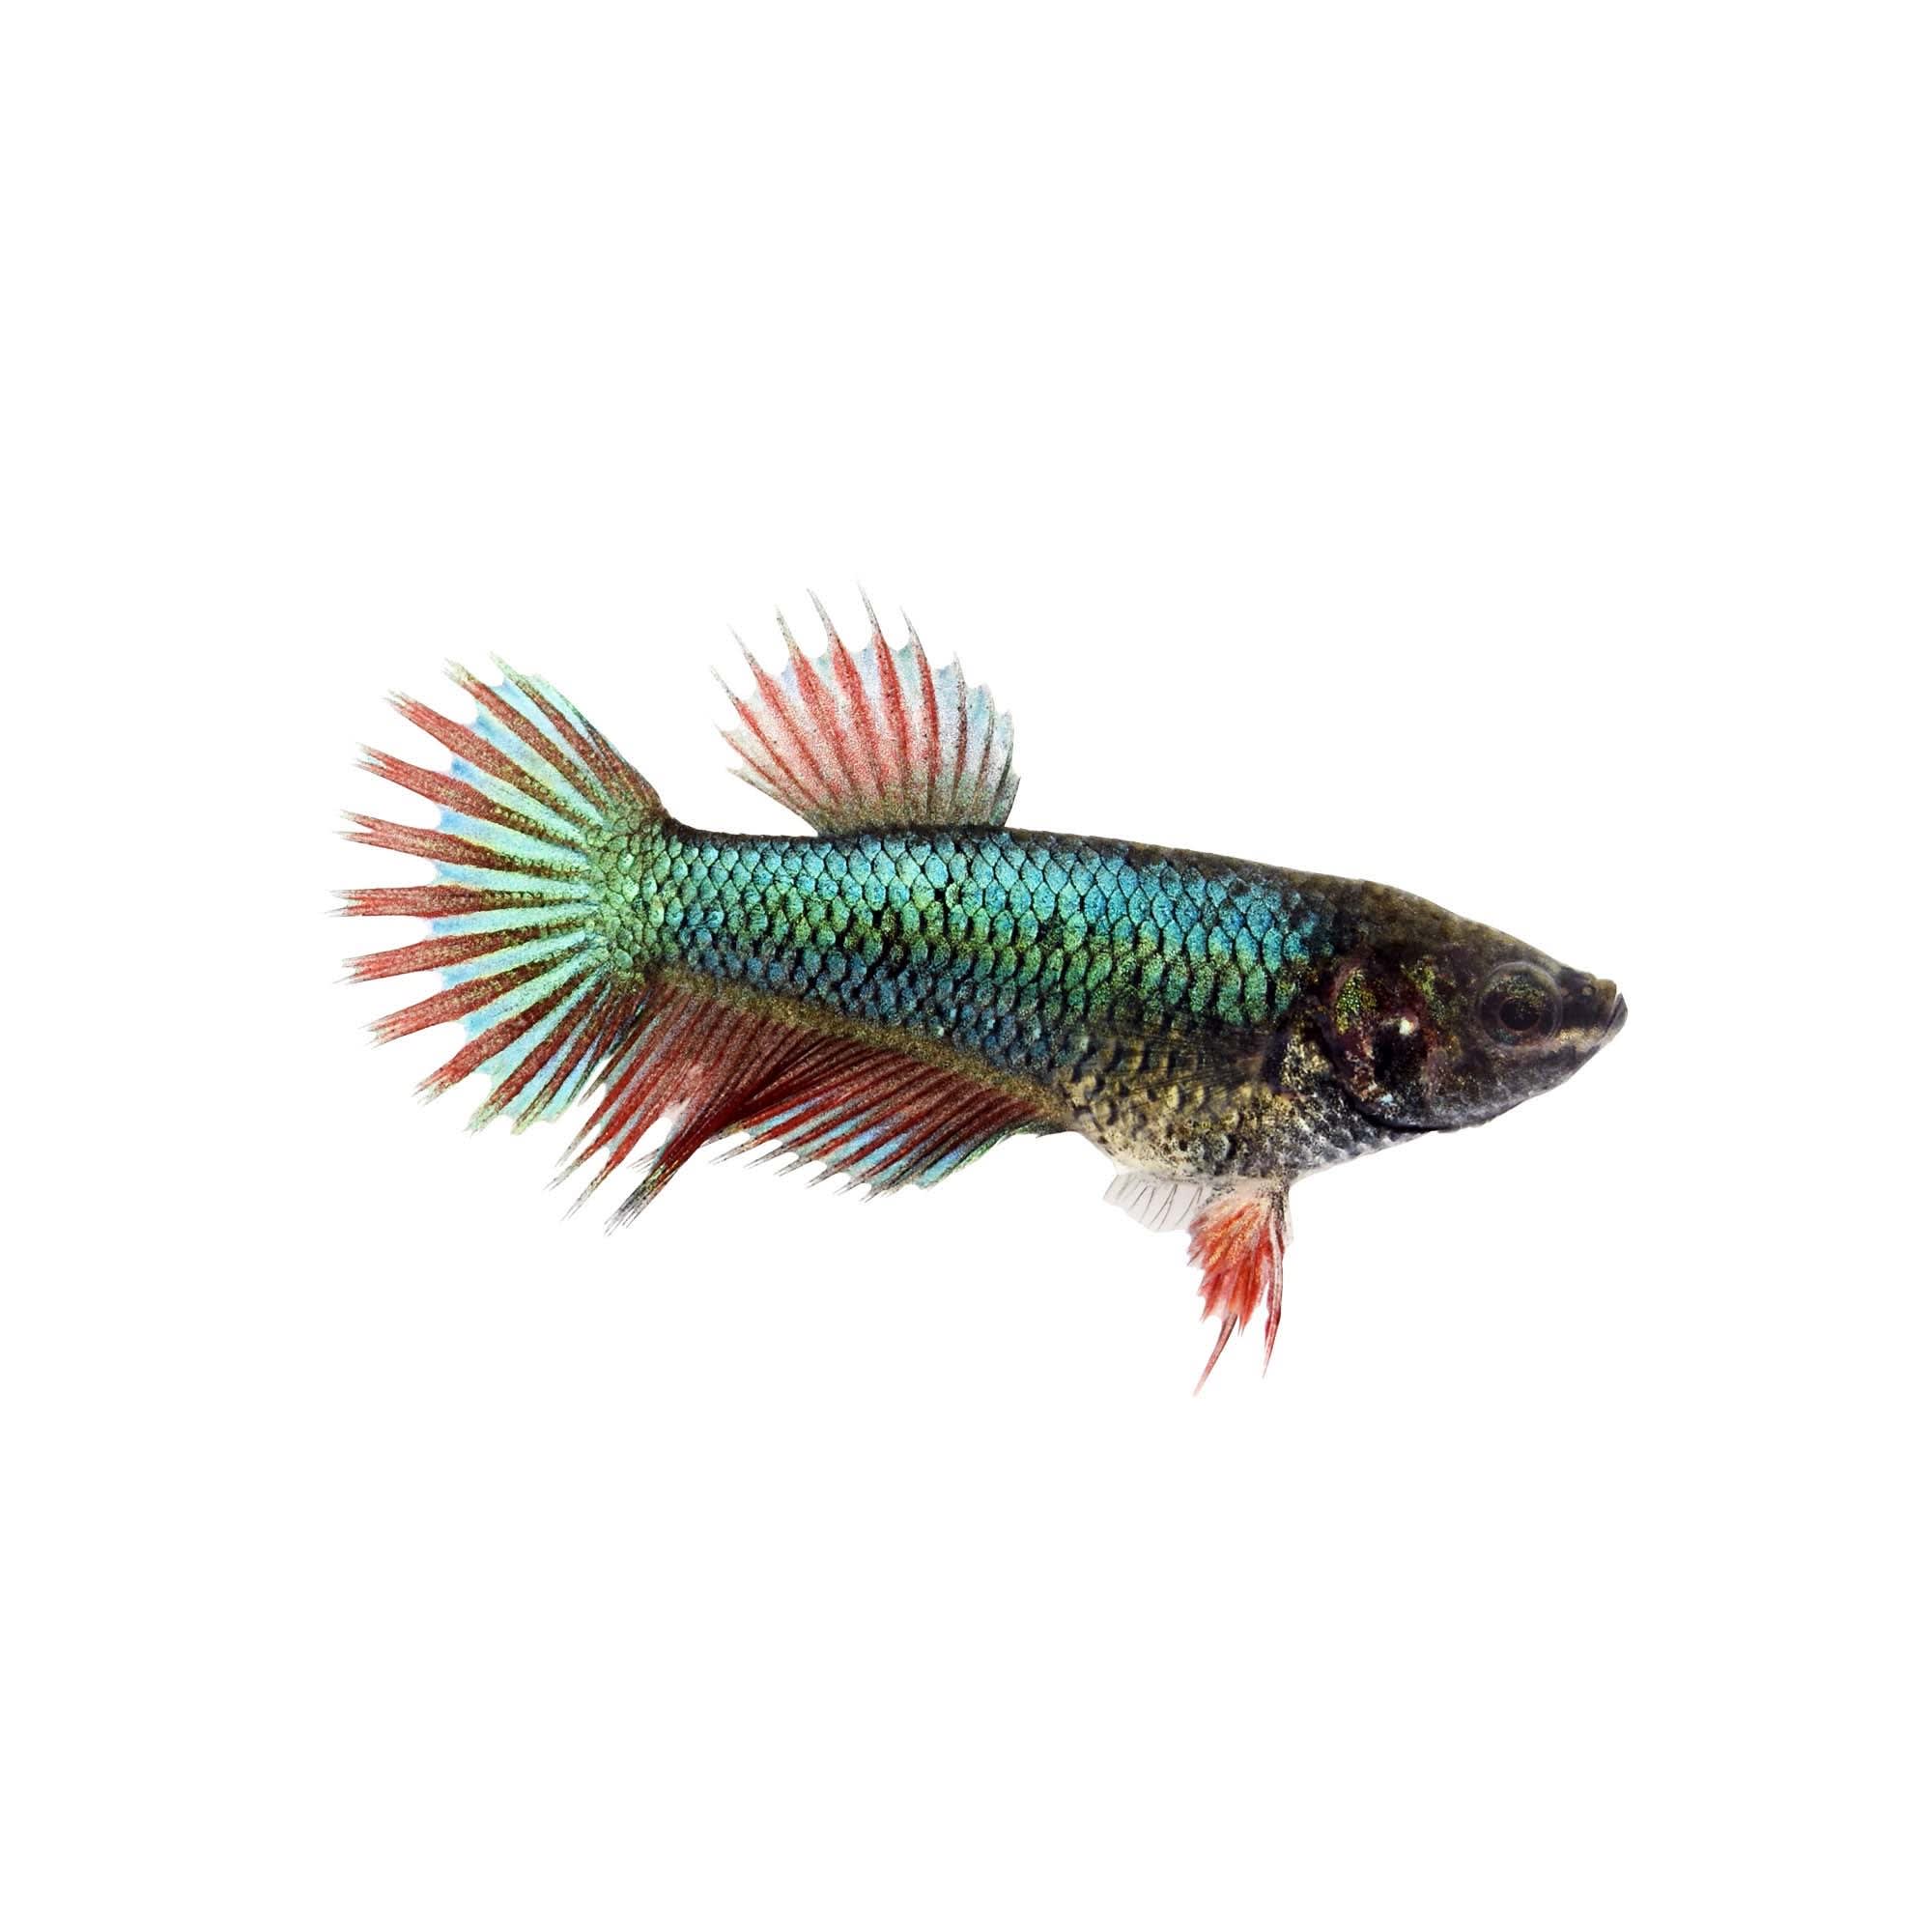 Female Crowntail Betta Fish (Siamese Fighting Fish) for Sale